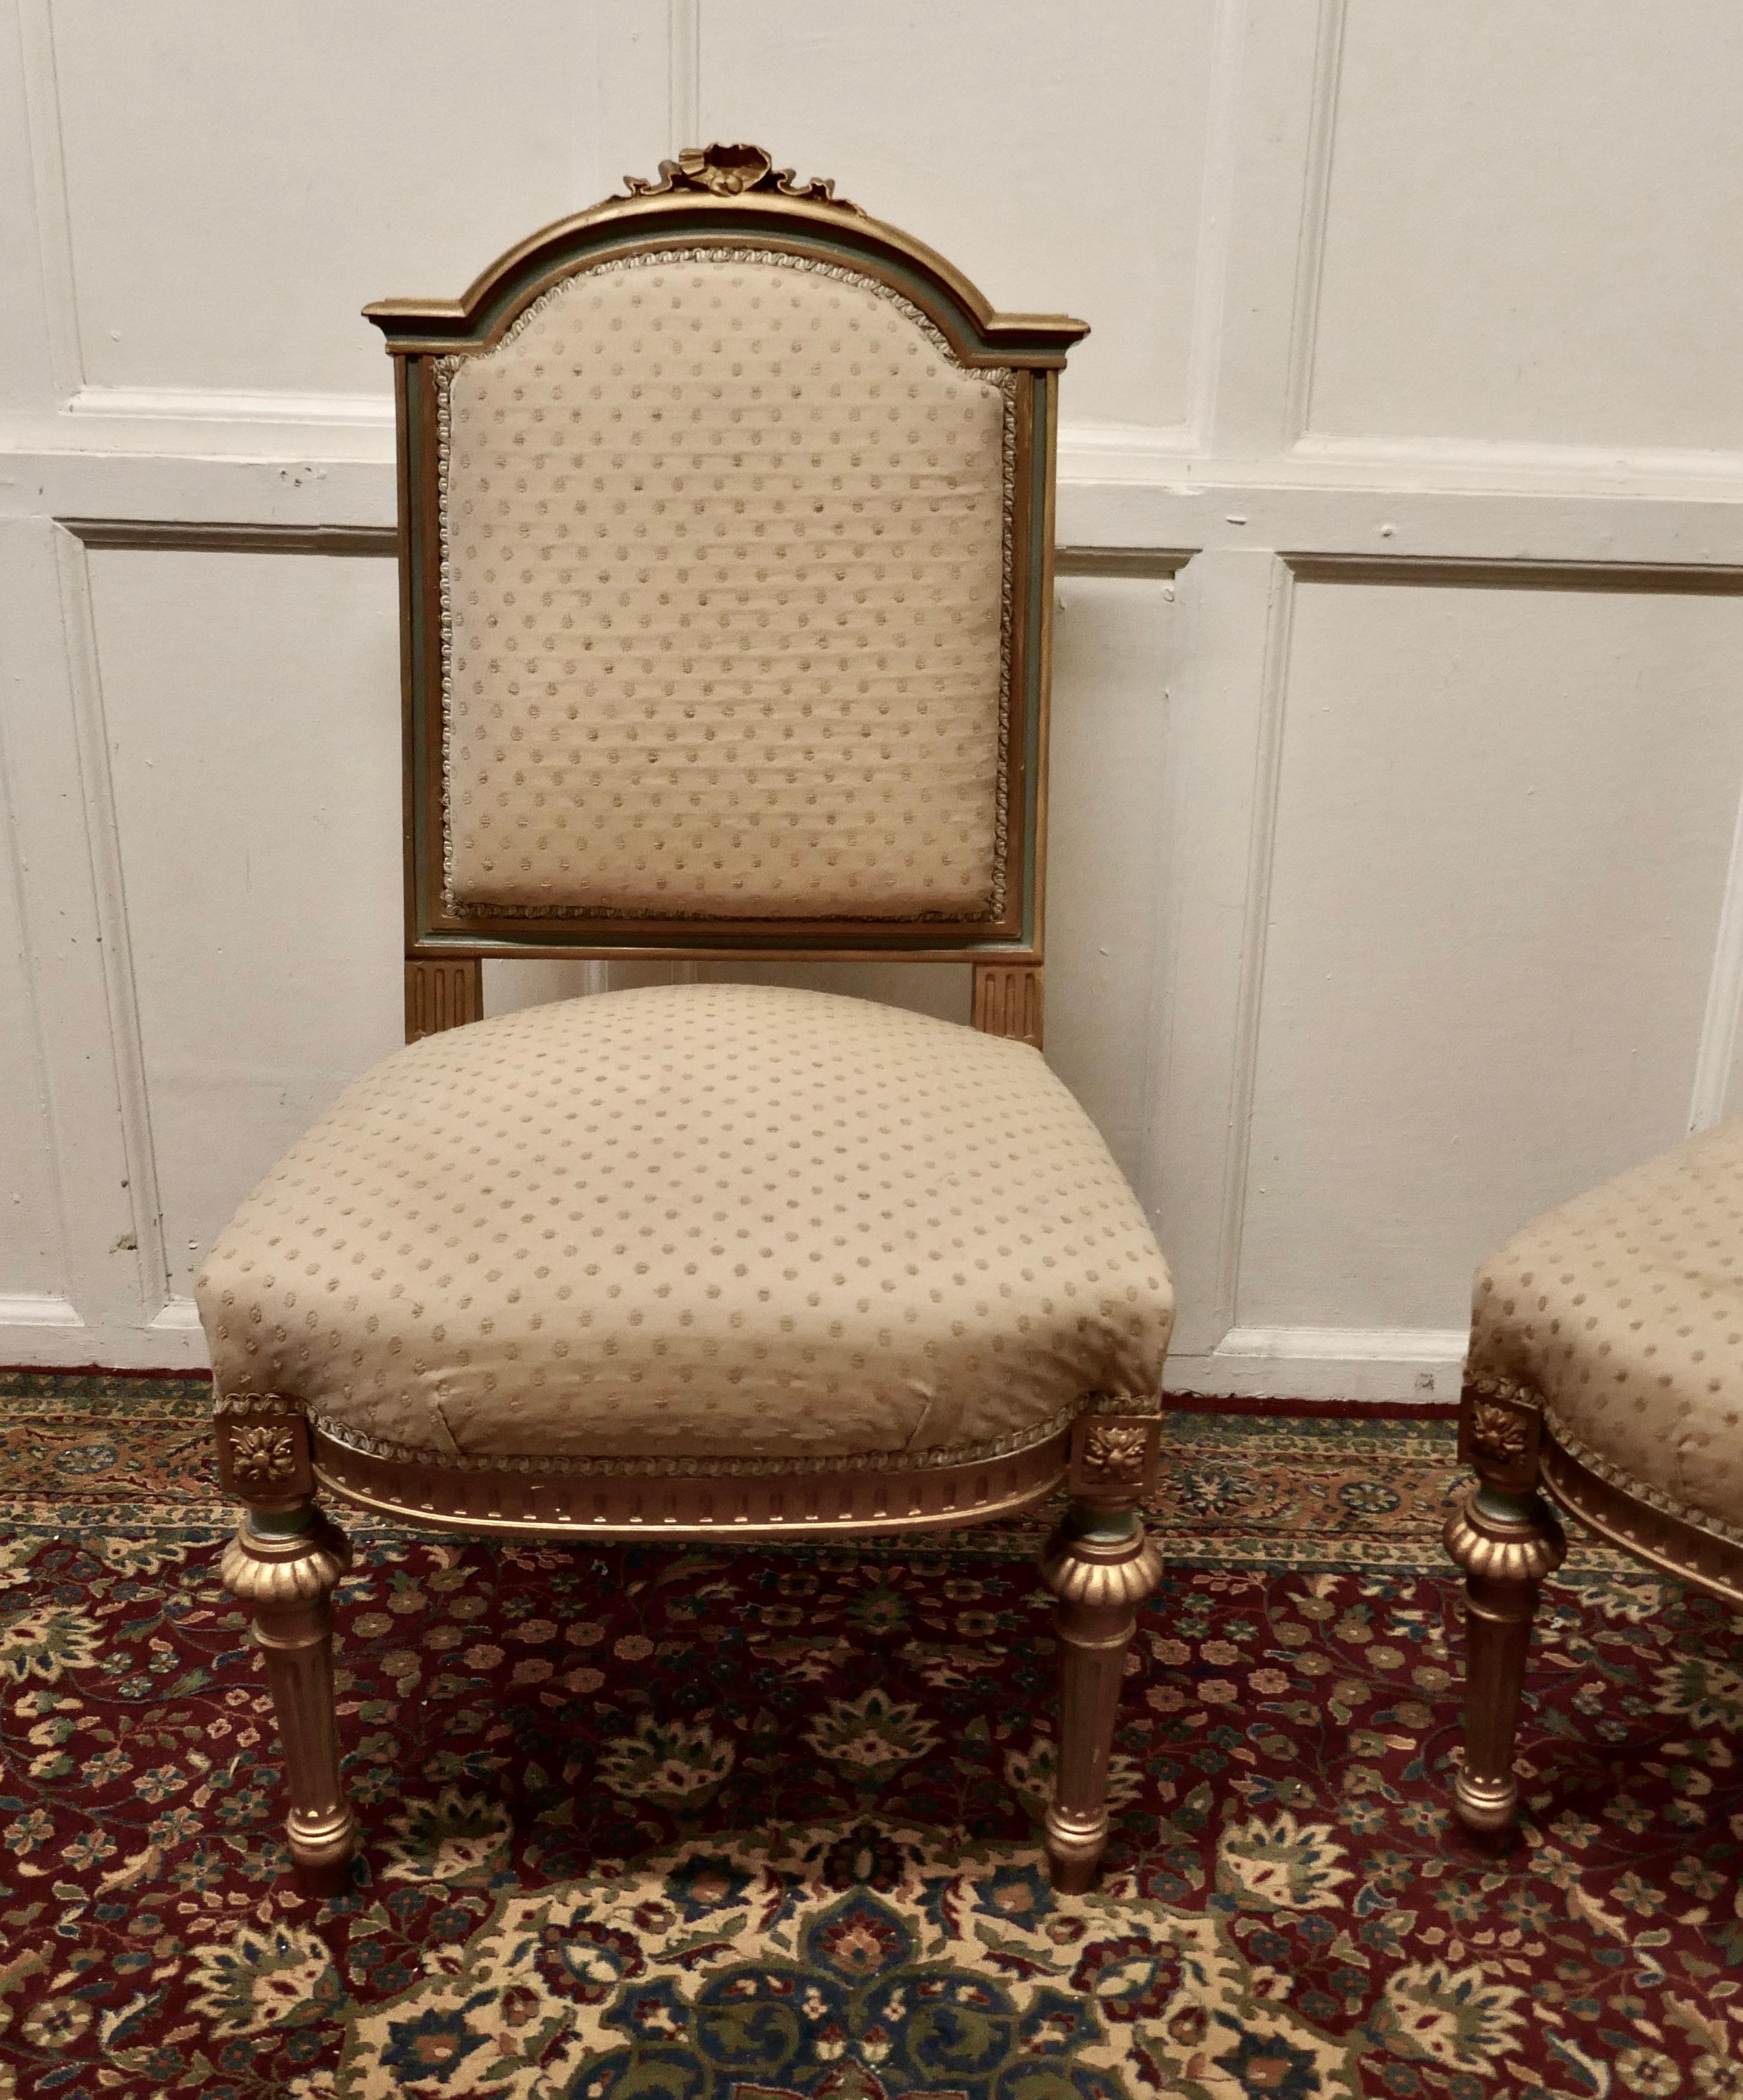 A pair fine quality French gilt salon chairs circa 1880
 
Old world faded elegance a pair of French salon chairs in the Louis XVI style, the chairs are in original gilt and powder blue finish they come in their original oatmeal coloured silk